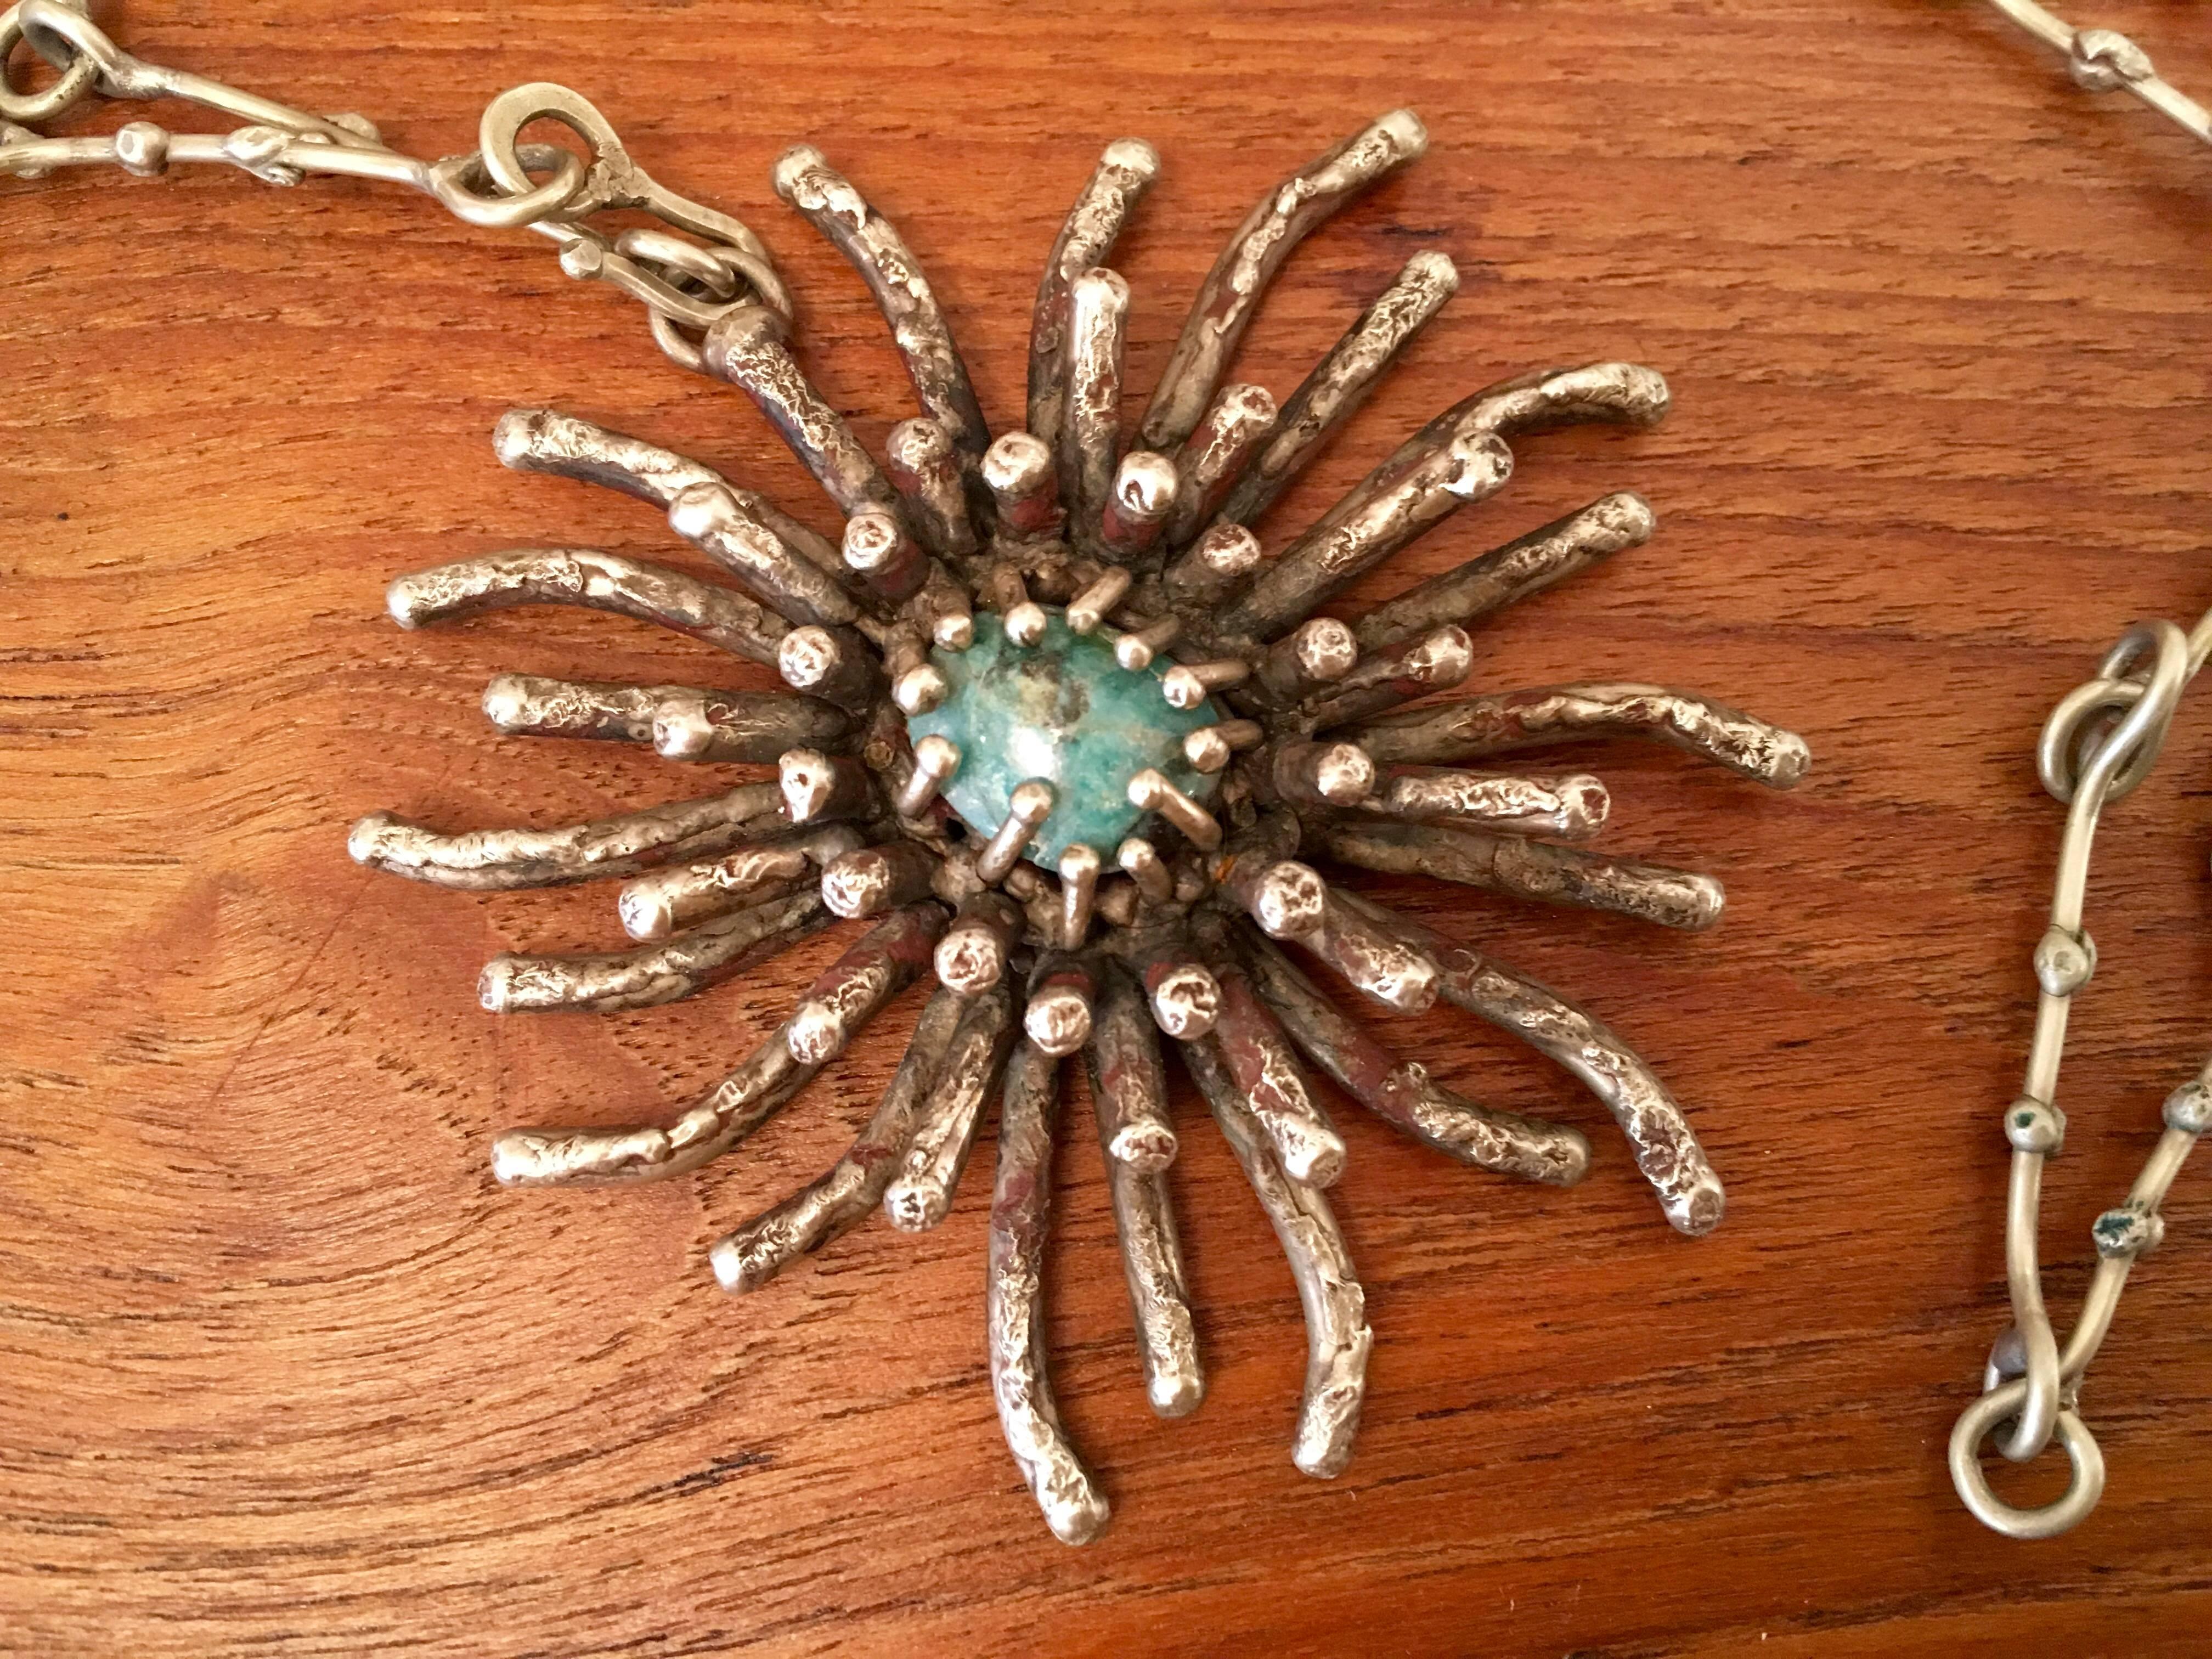 Sculptural, oversized necklace created by Pal Kepenyes of Mexico. Hand-wrought, sterling silver, beaded, chain is 28